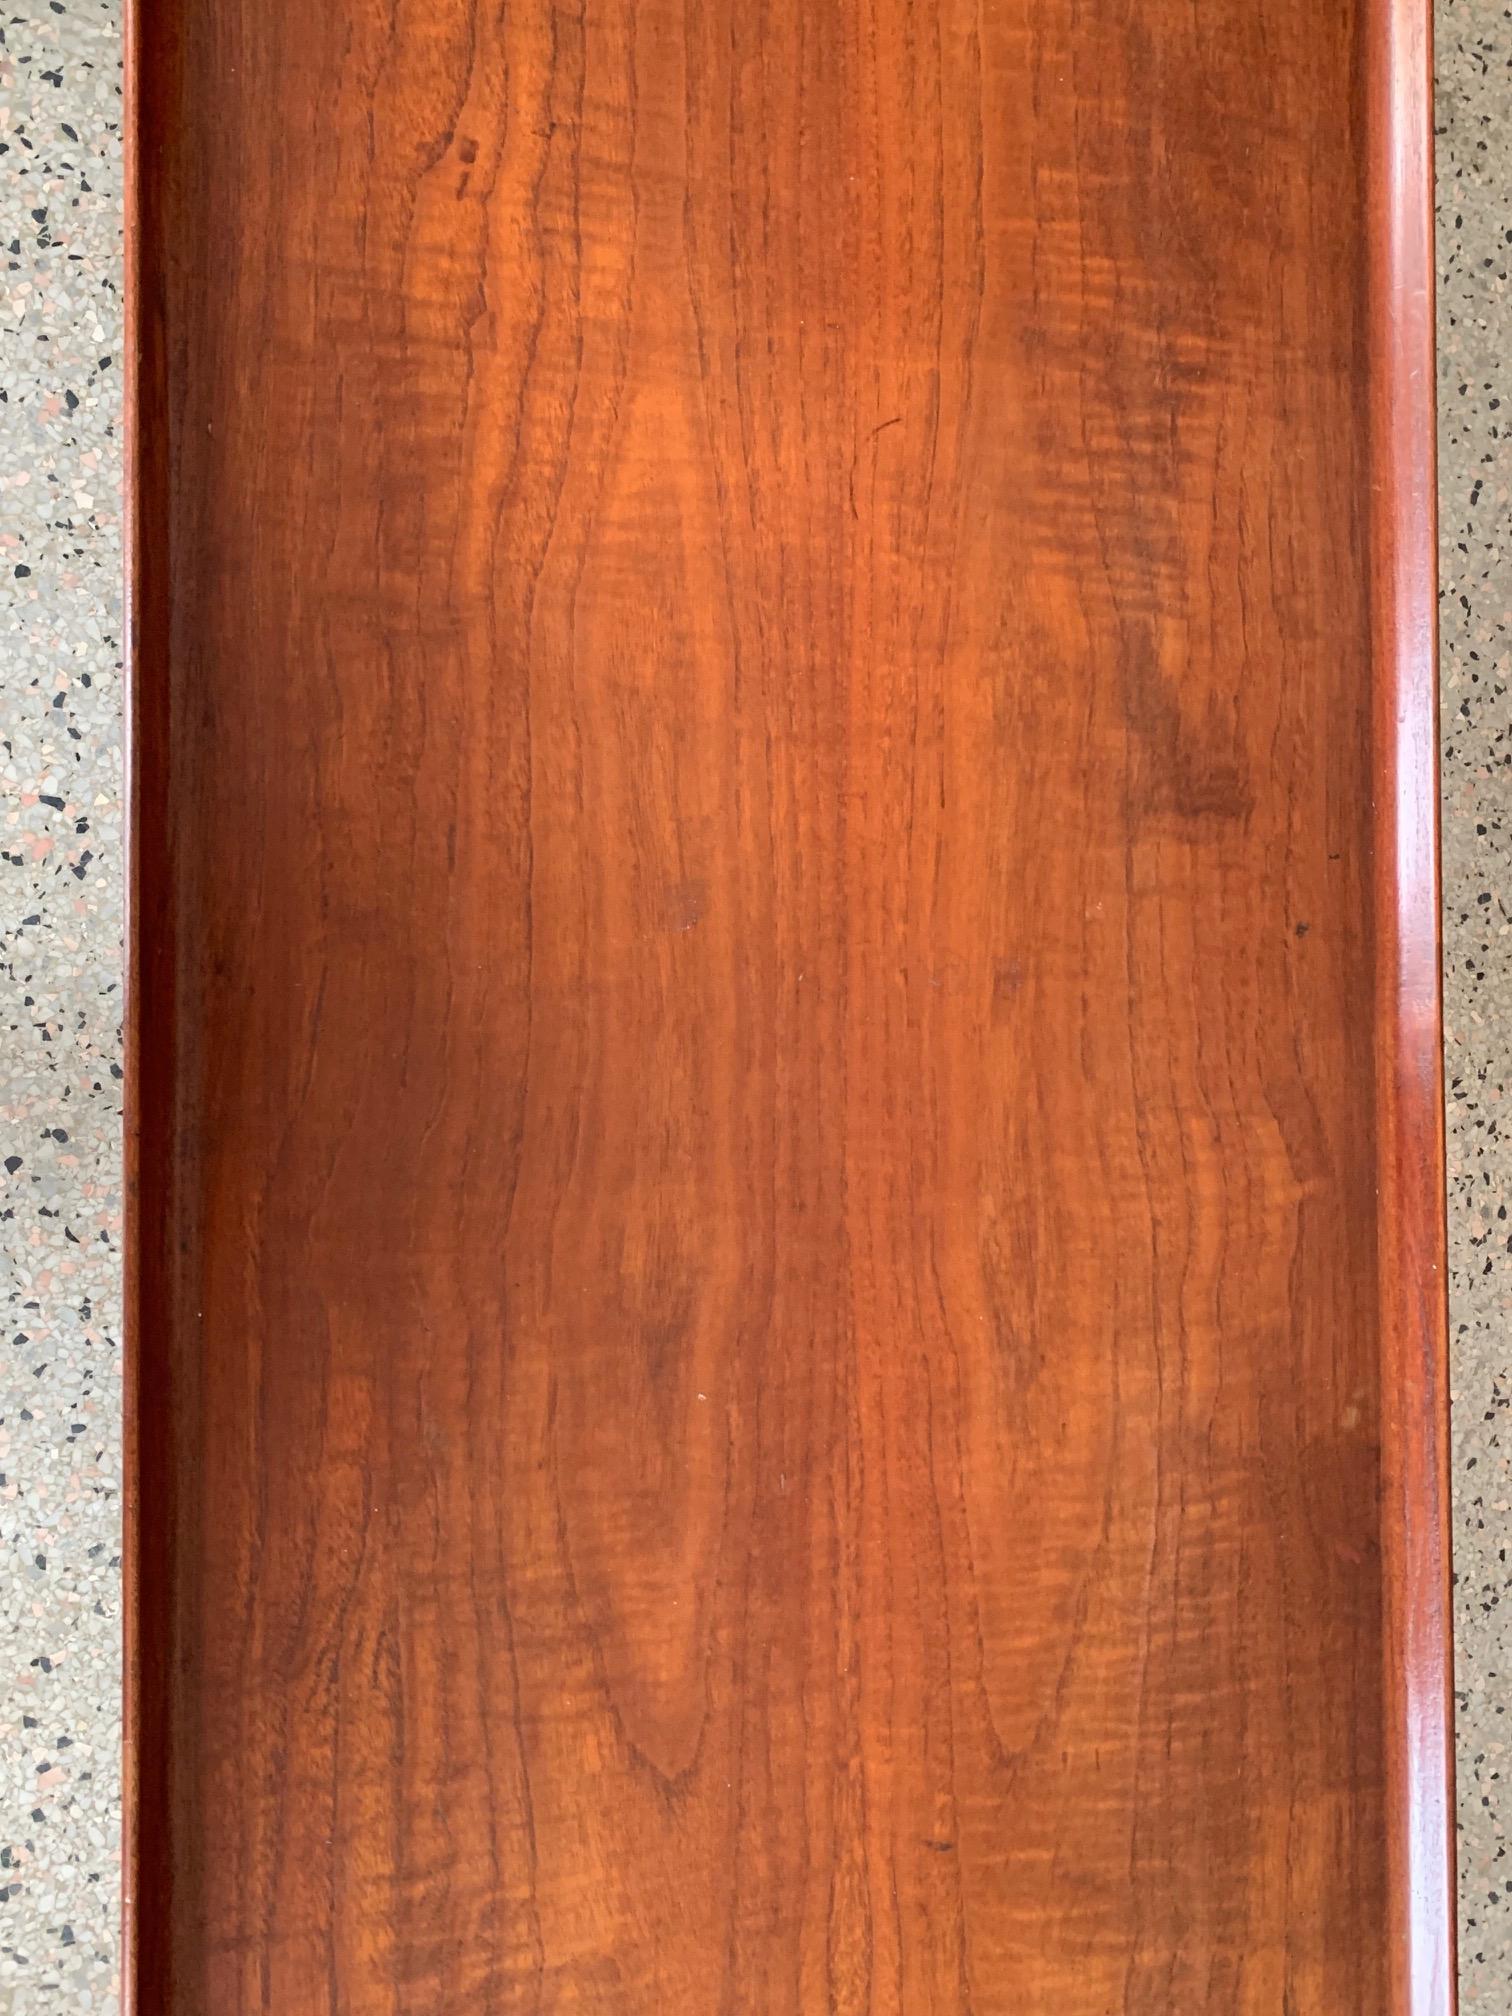 Rare J.Clausen Teak Coffee Table, circa 1950s In Good Condition For Sale In St.Petersburg, FL